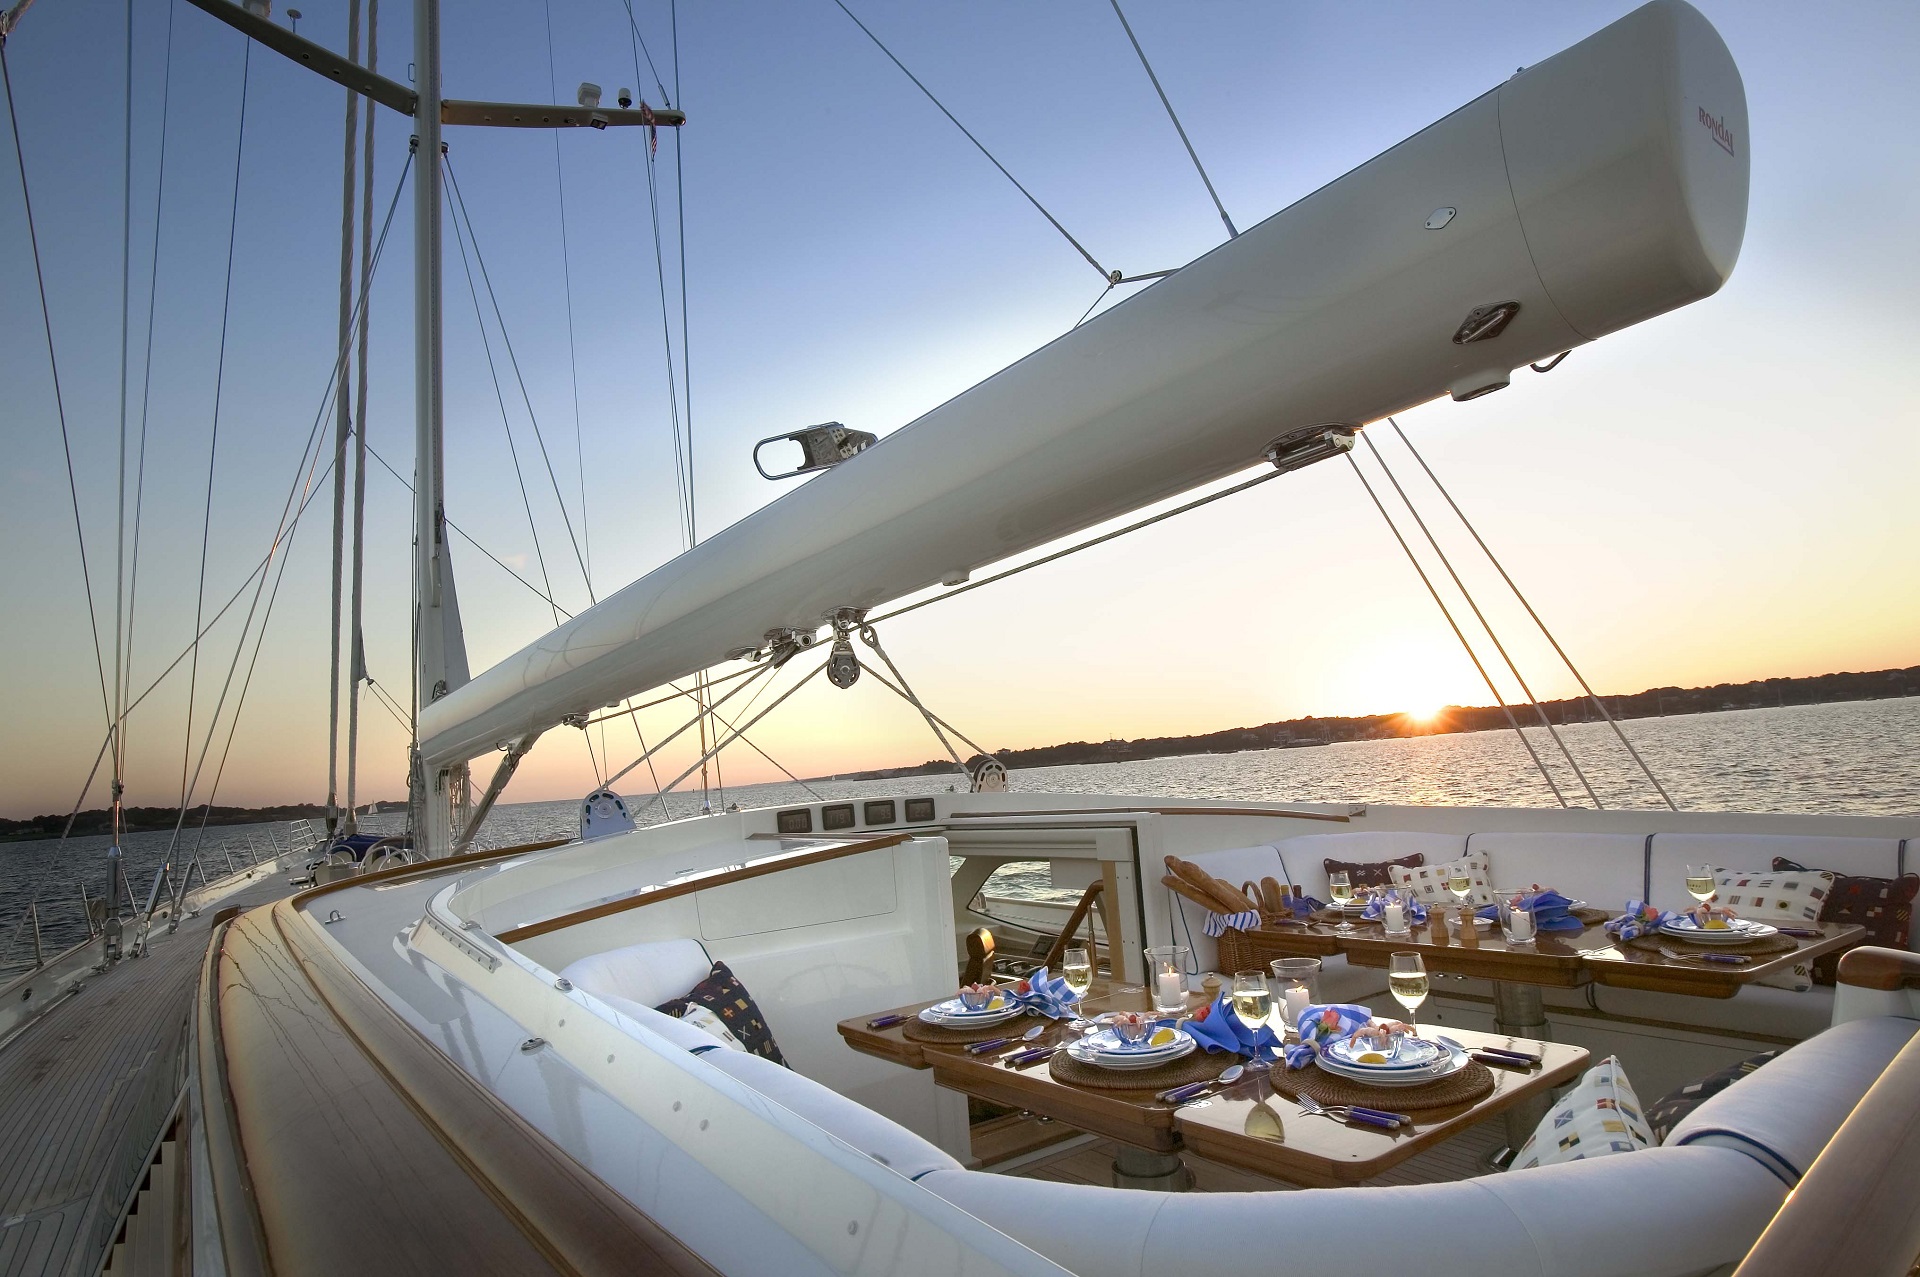 sailing yacht asolare's deck seating area featured in film runner runner (starring justin timberlake and ben affleck)